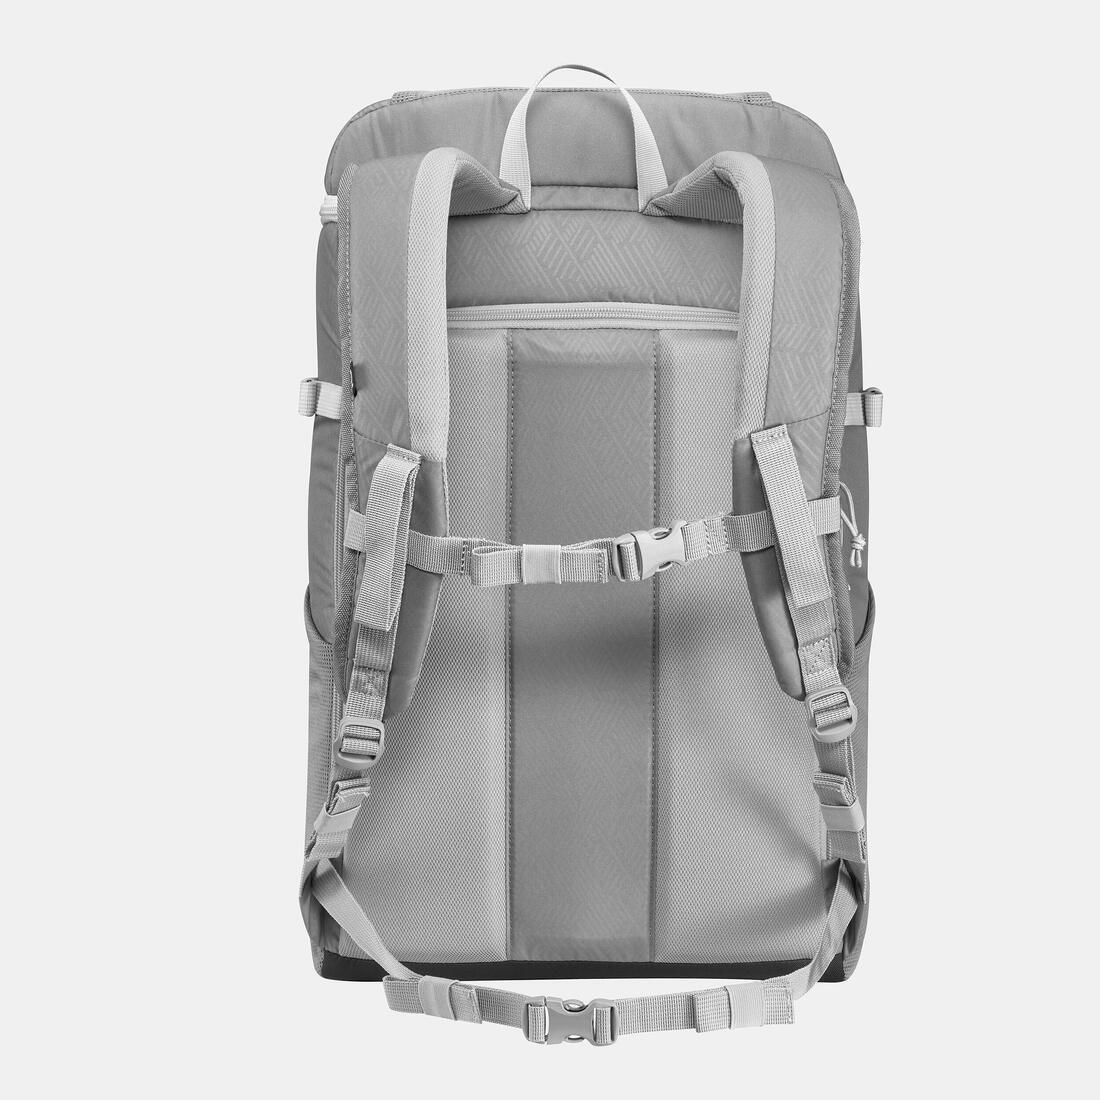 QUECHUA - Isothermal backpack 30L - NH Ice compact 100, Pewter